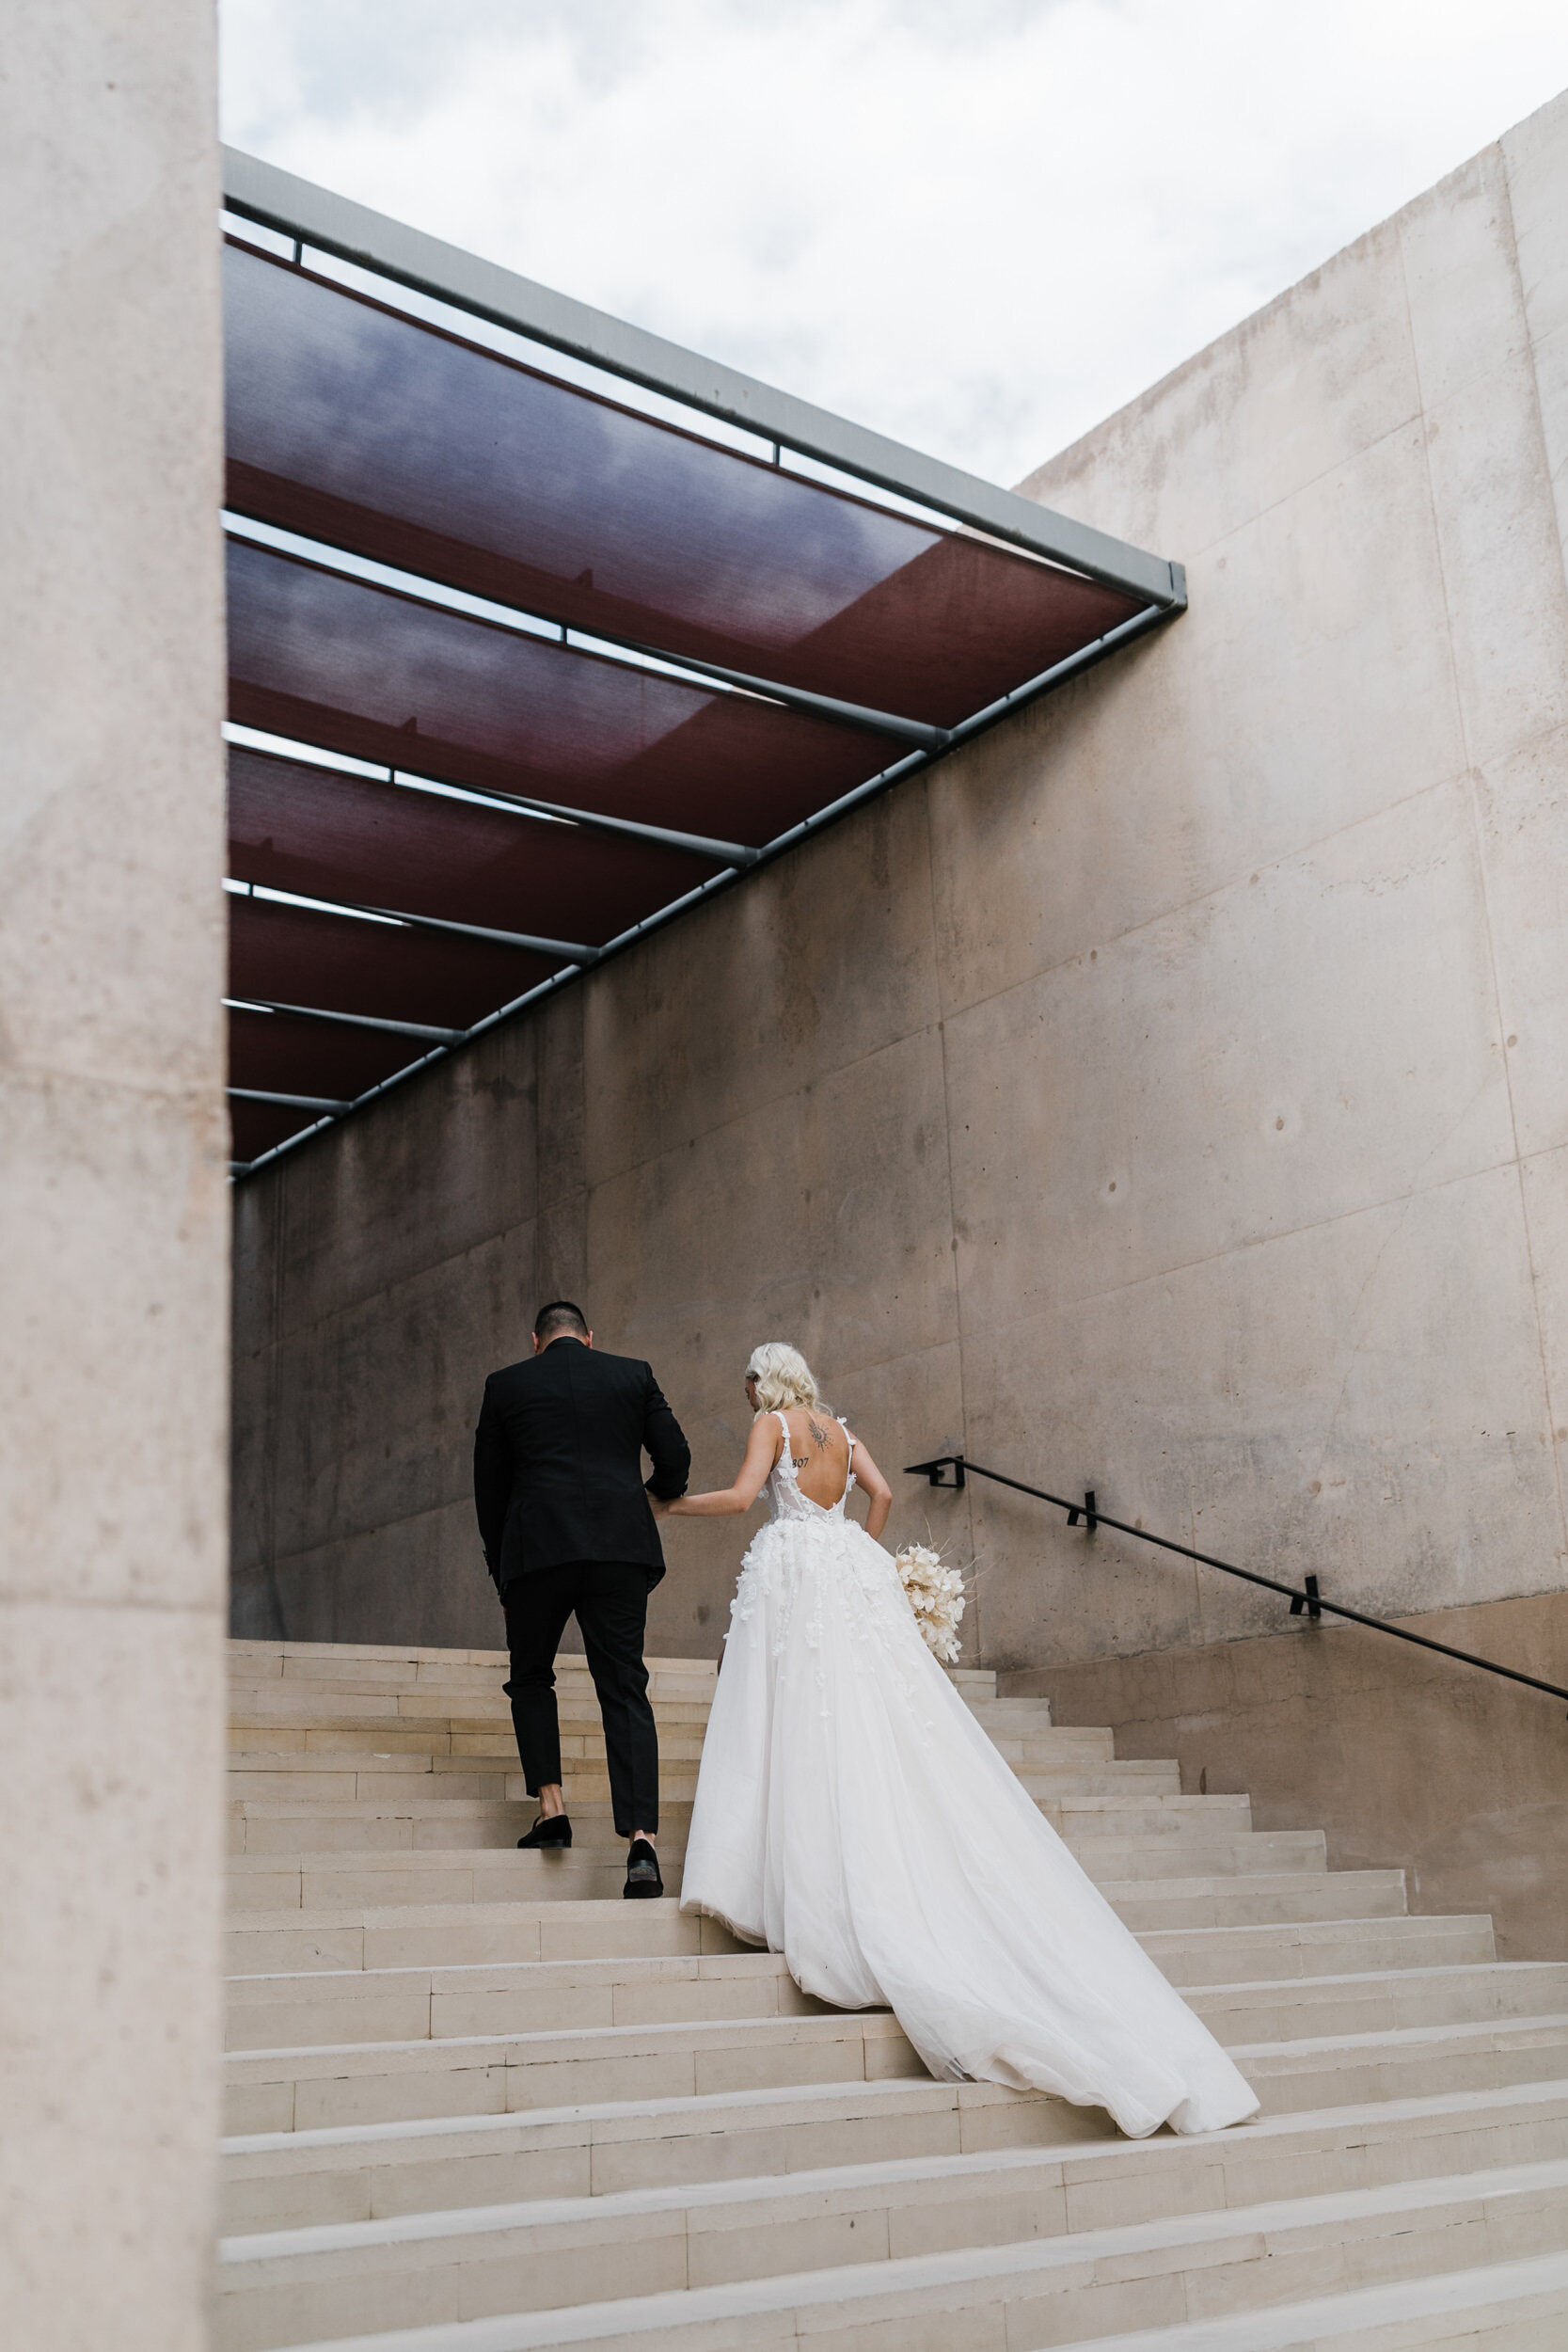 Amangiri wedding photographer for a luxury aman elopement | The Hearnes Photography